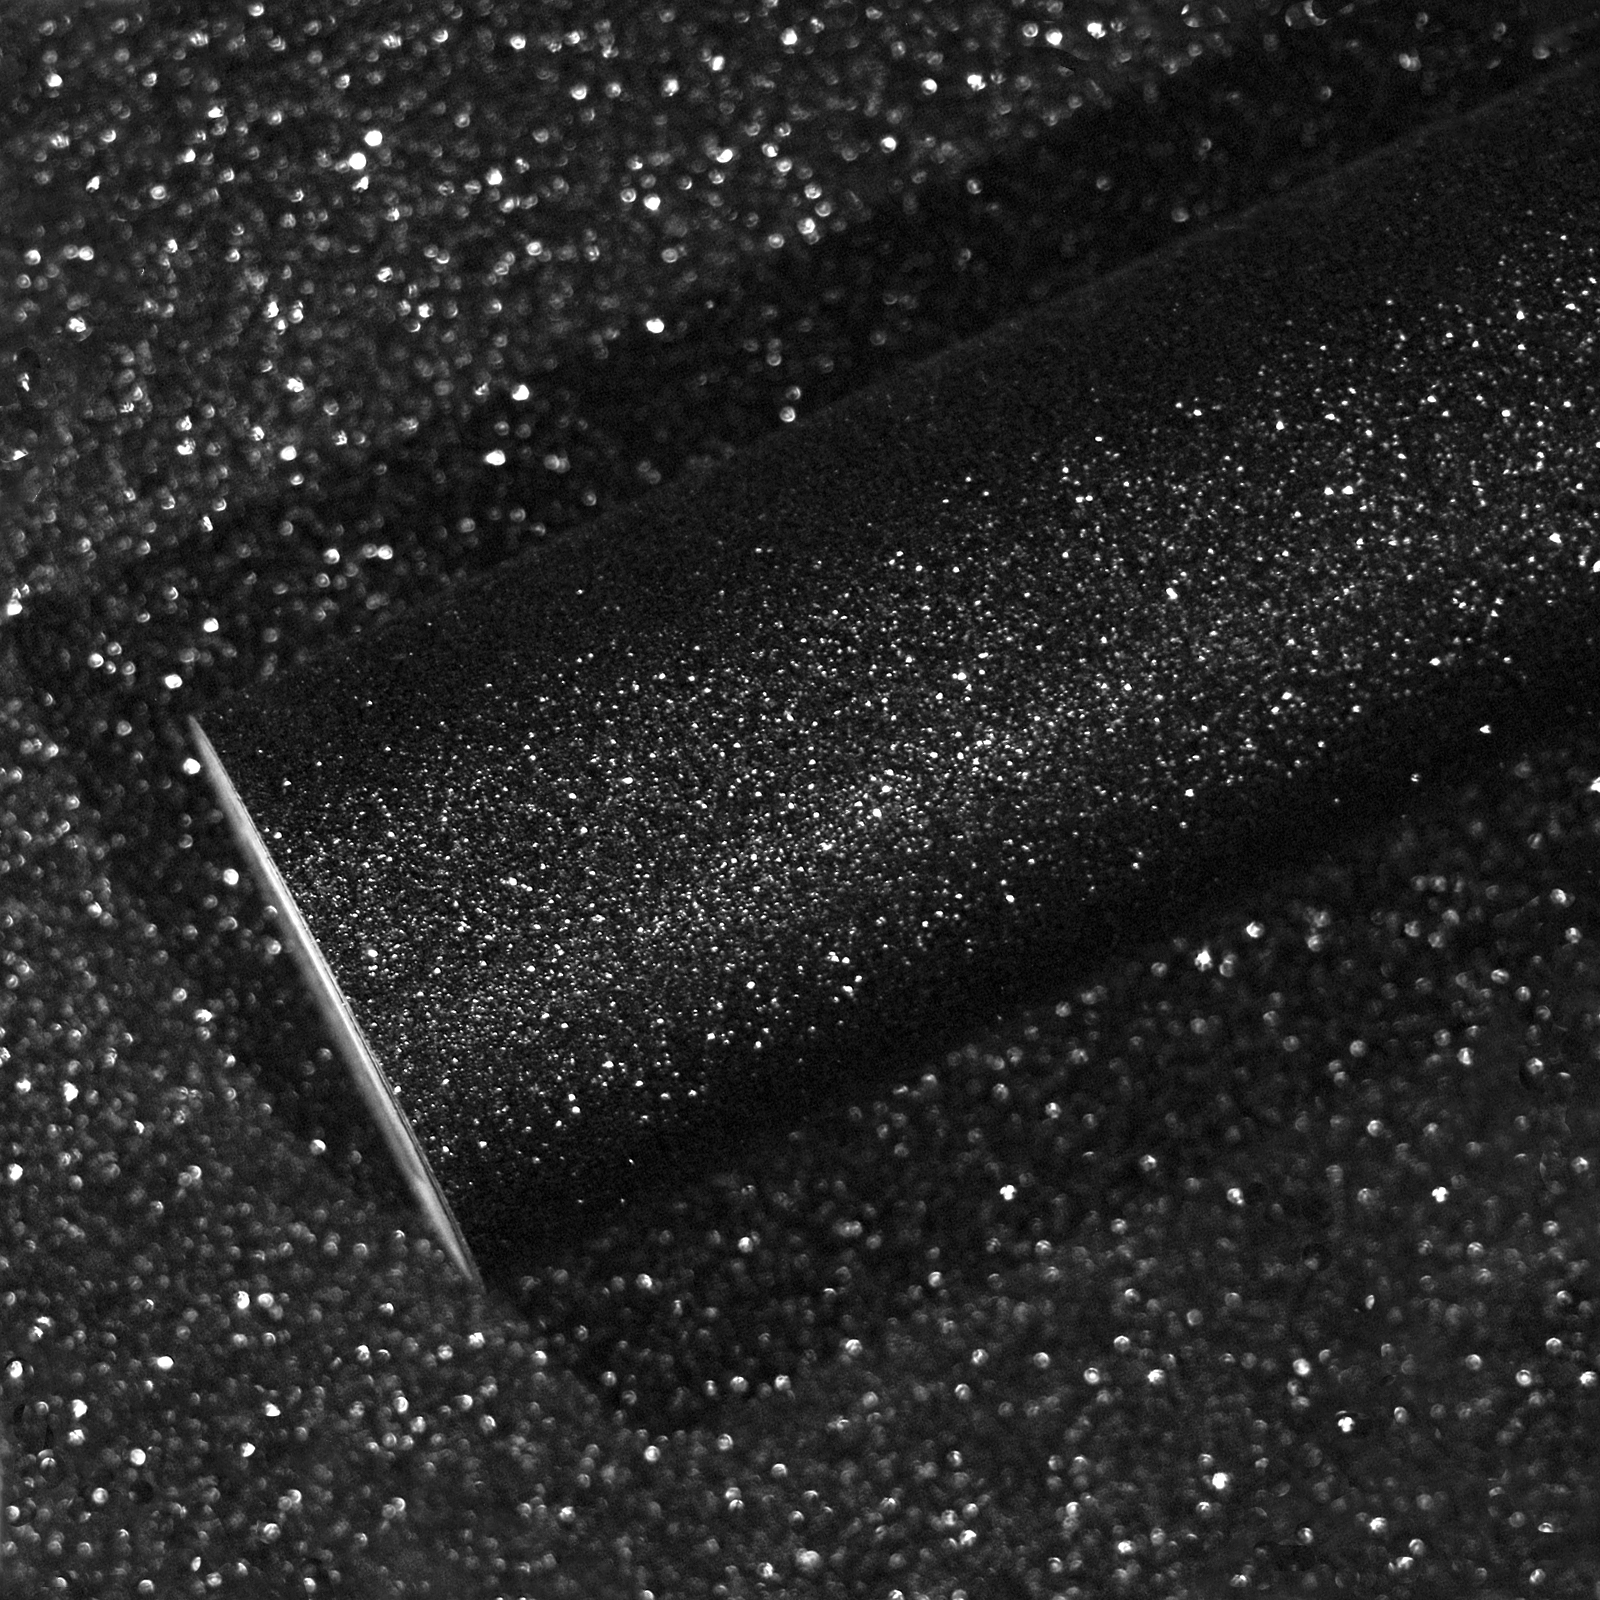 VEELIKE Black Glitter Wallpaper 15.7''x118'' Peel and Stick Sparkly Glitter  Black Contact Paper Decorative Self Adhesive Removable Glitter Fabric Wall  Paper Roll for Bedroom Wall Decor Cabinets Liners 